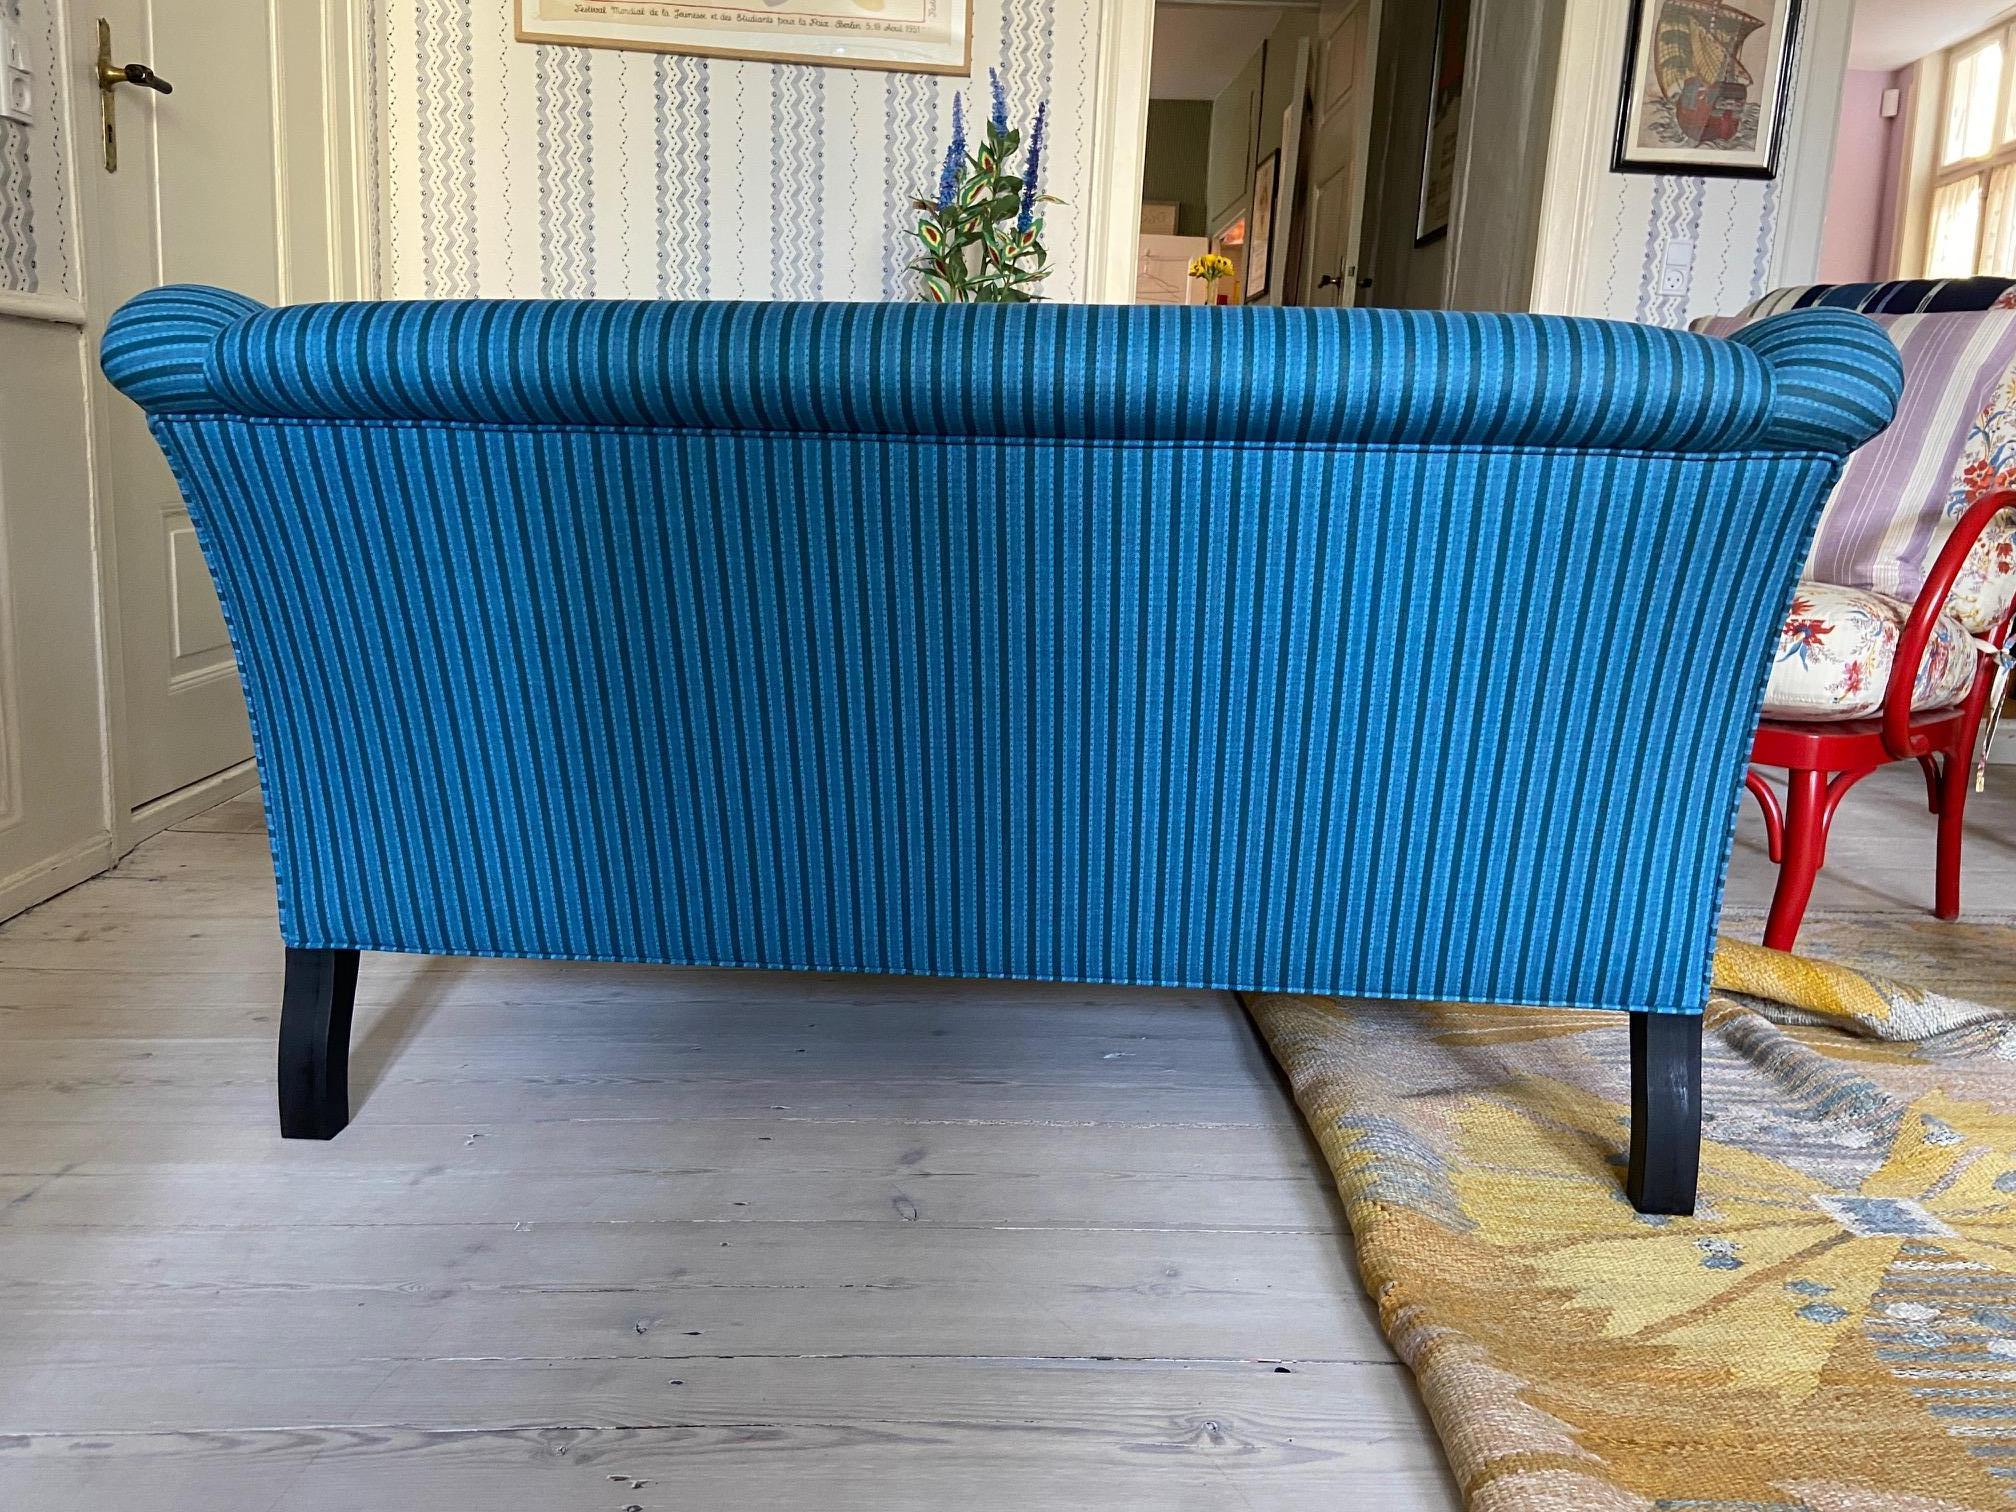 Contemporary Sofa in Customized Blue Upholstery by the Apartment, Belgium, 2020 For Sale 2